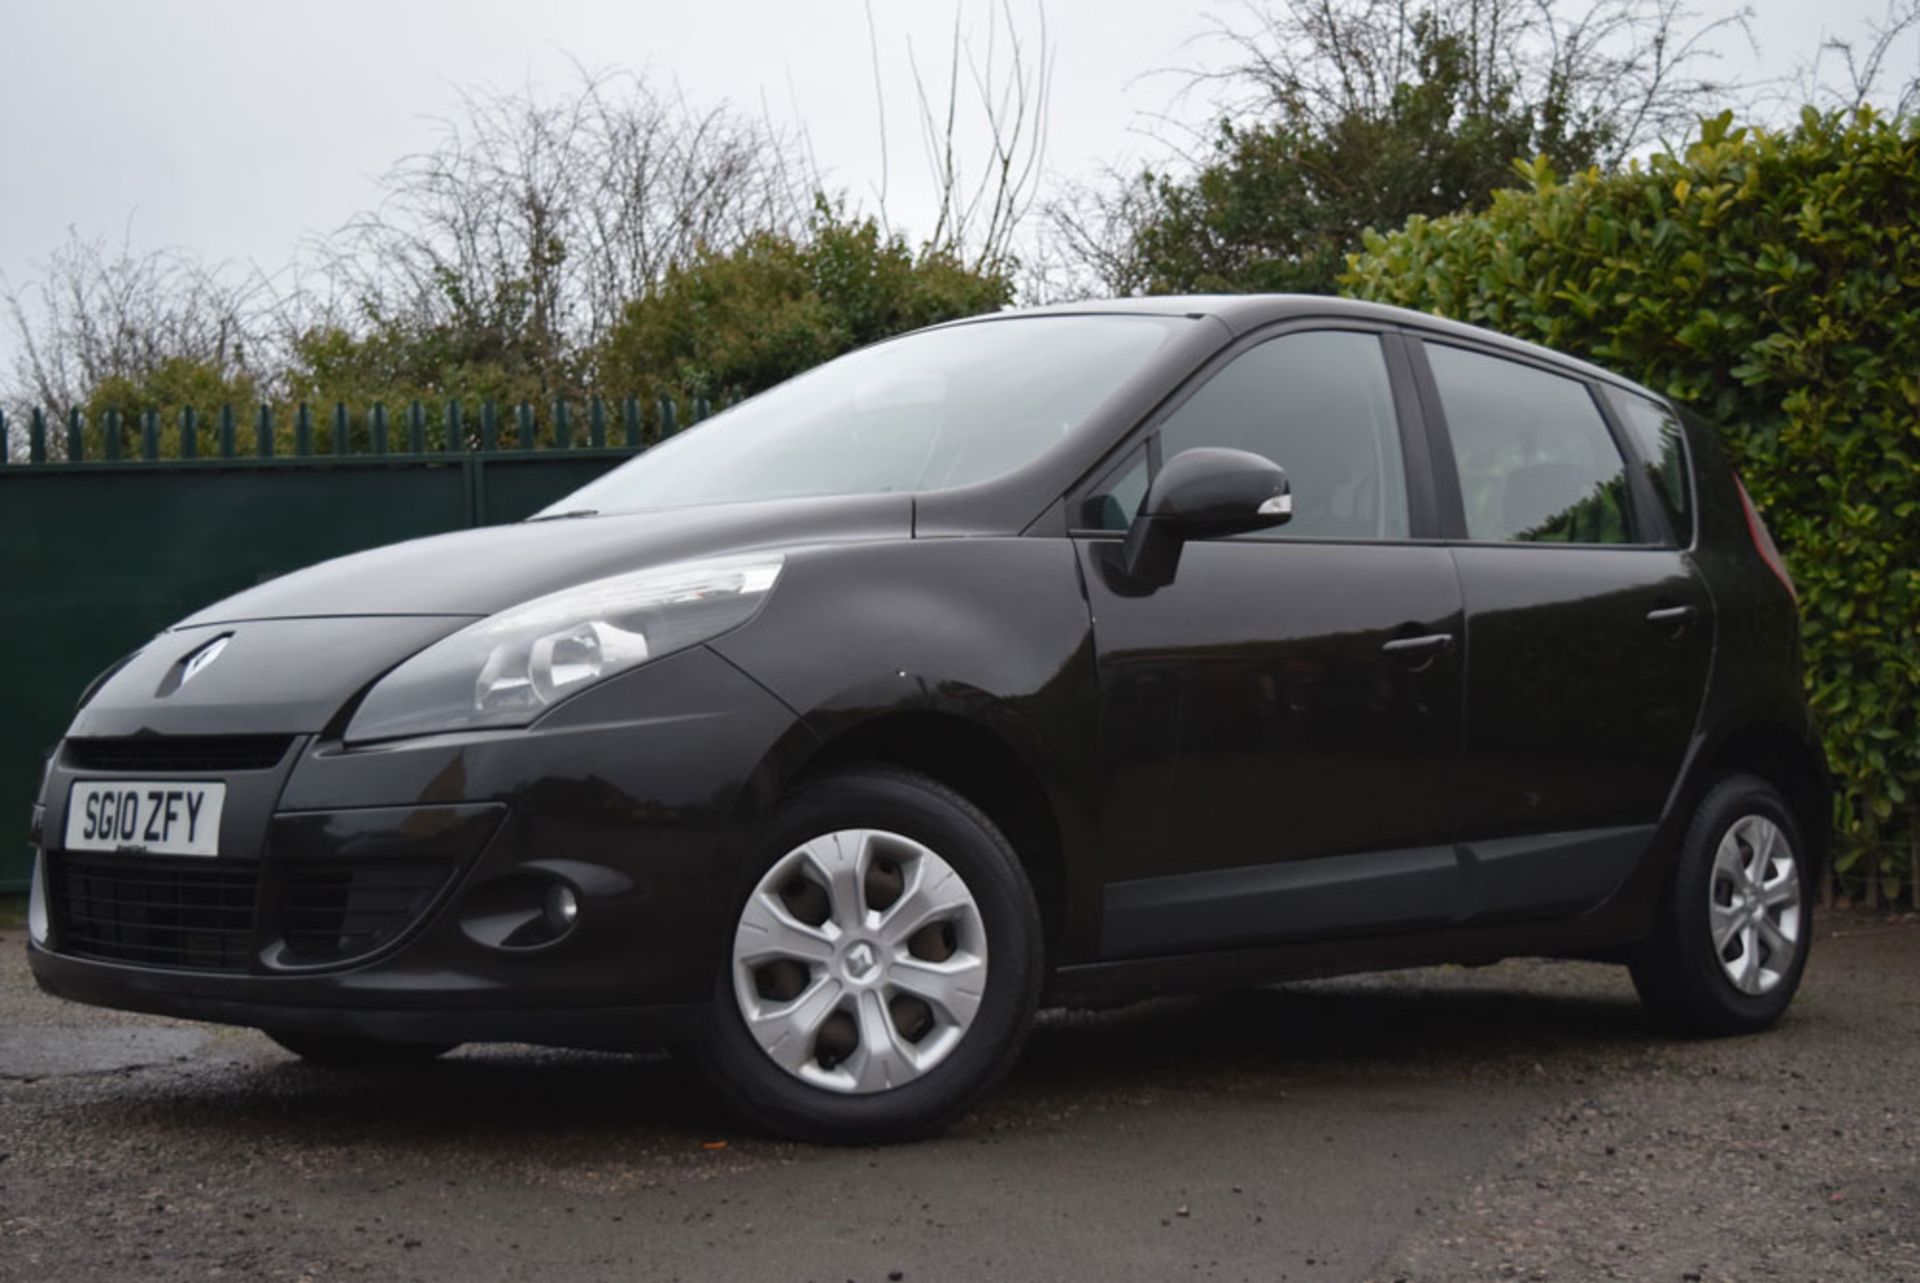 2010 Renault Scenic 1.5 Expression dCi 105 5dr - Image 3 of 11